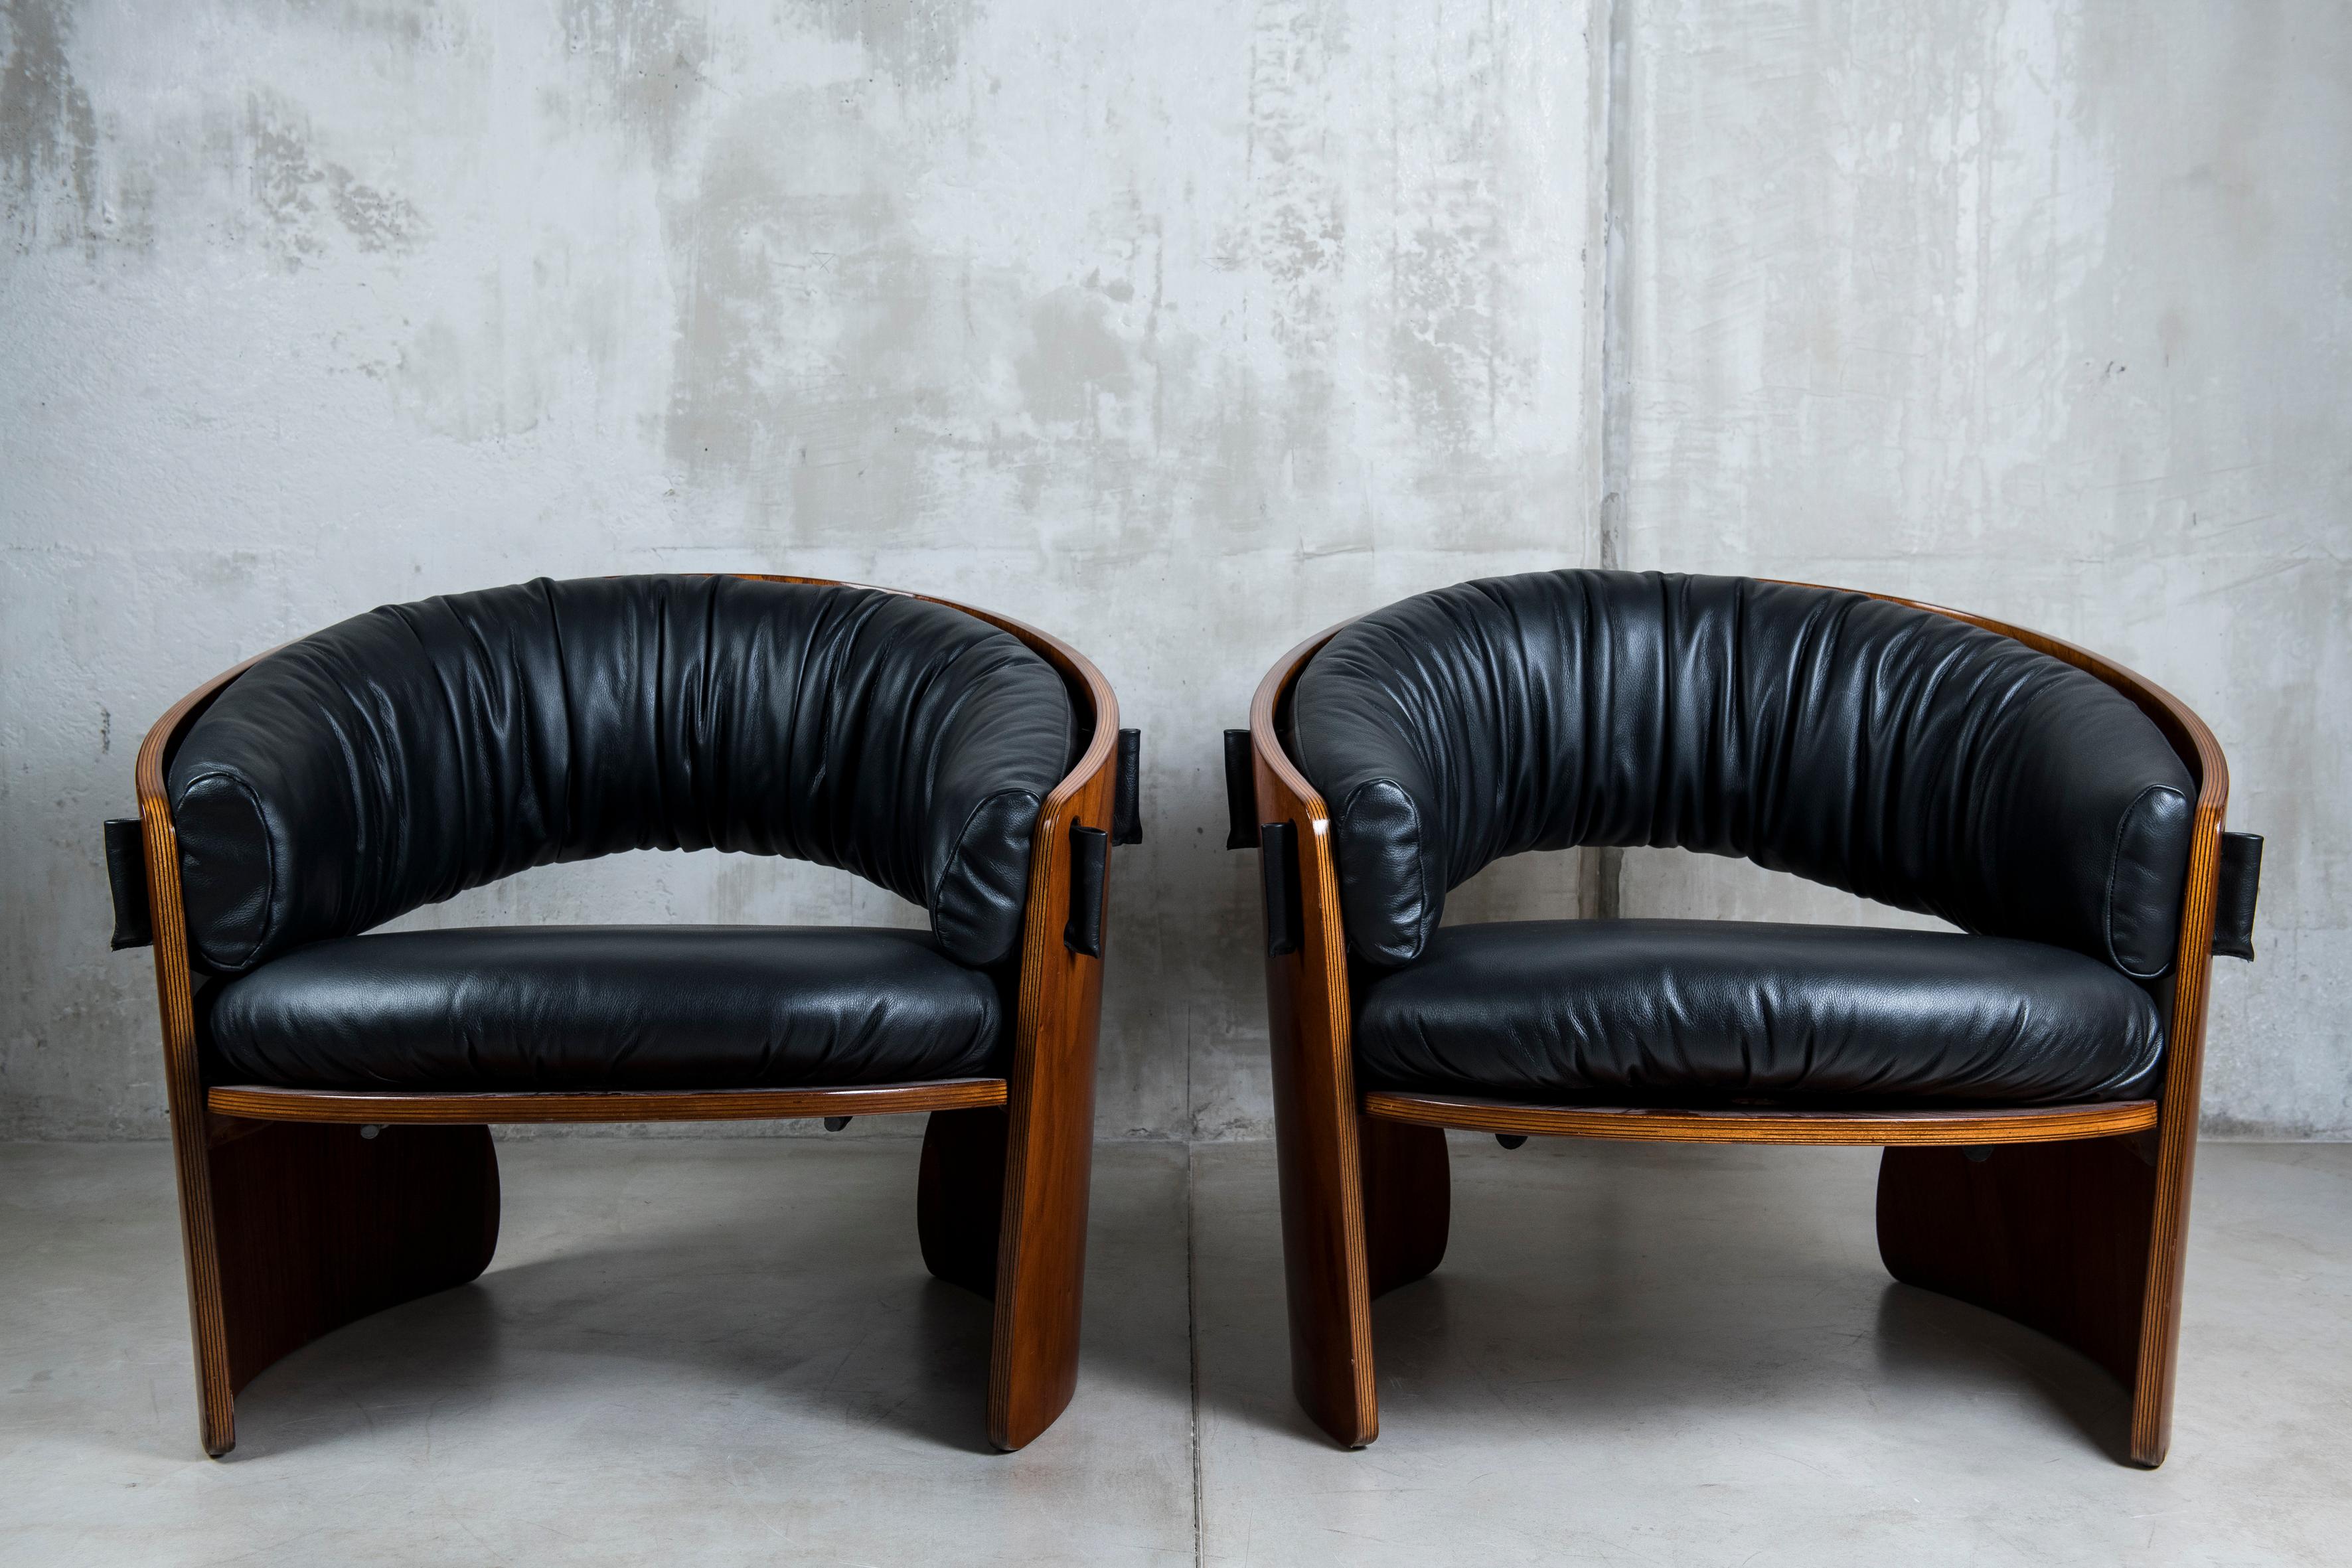 Set of pair of wood and leather armchairs with coffee table. Designed by Ricardo Blanco, 1969 for Stilka. Argentina.

Ricardo Blanco (1940-2017)

1940 was born in Buenos Aires.
1963 attends the seminary of Tomás Maldonado.
1966 wins the First UTN